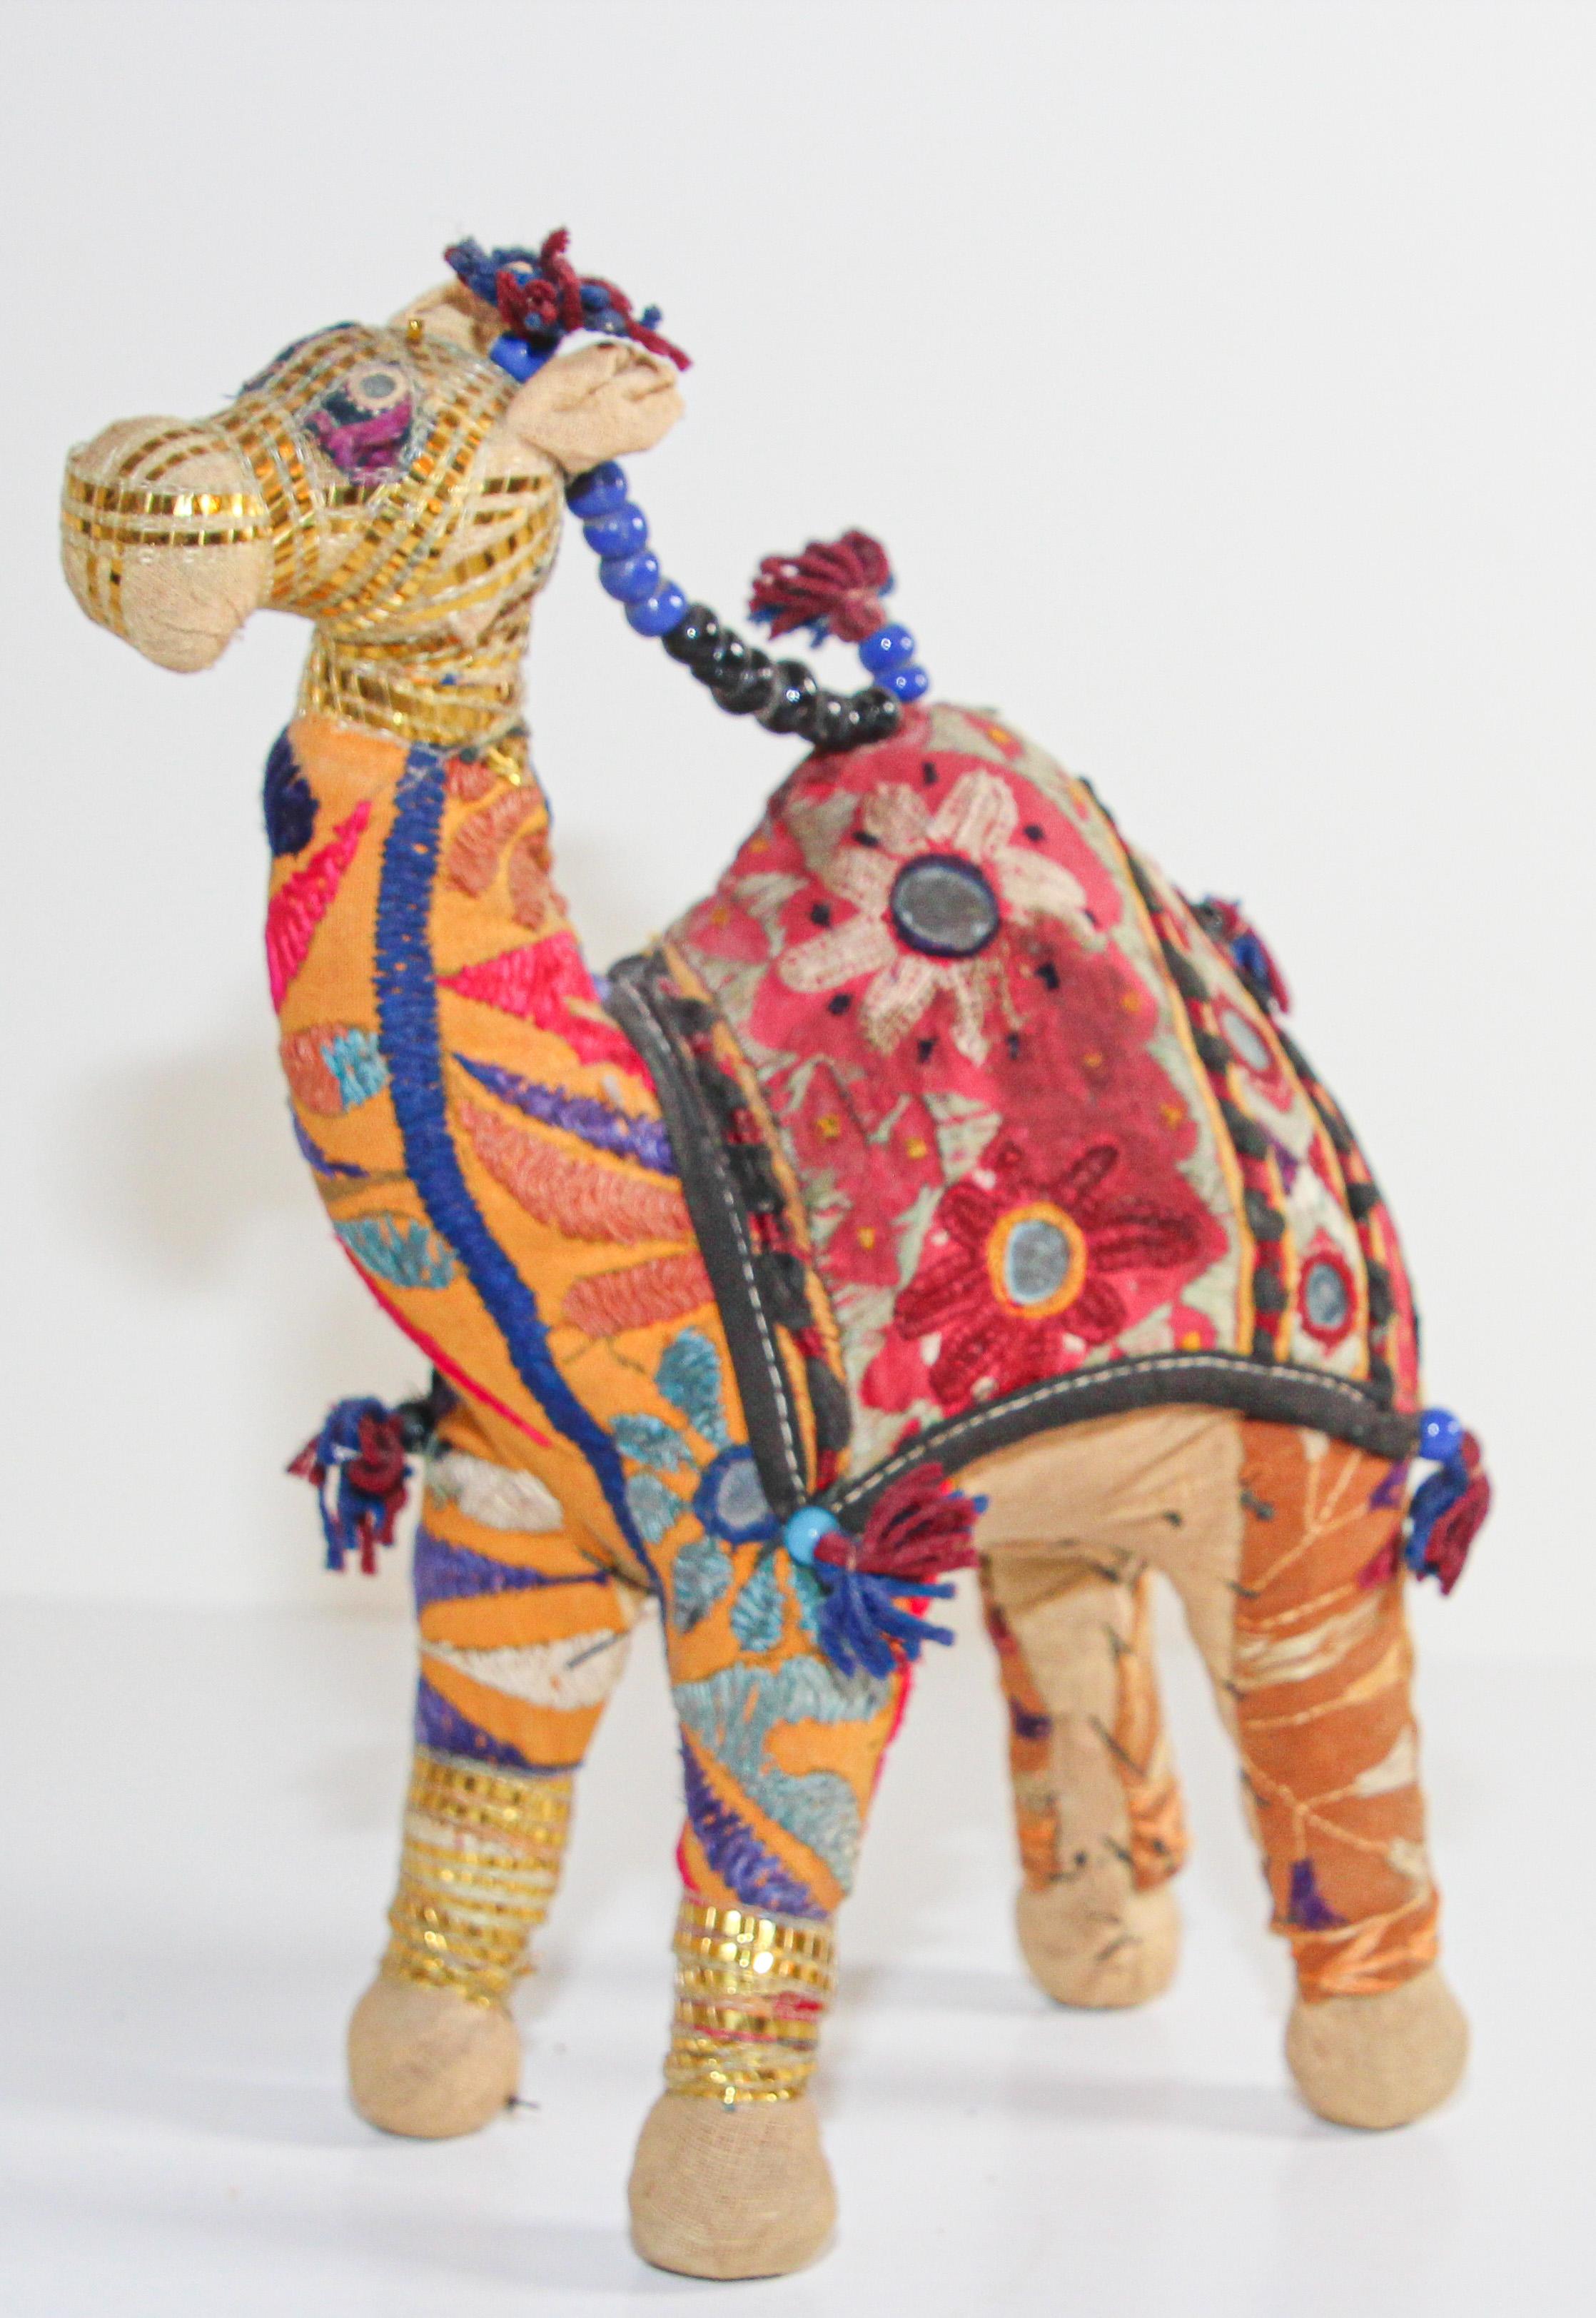 Handmade in Rajasthan, India, colorful fabric camel toy.
Vintage small camel stuffed cotton embroidered and decorated with small mirrors, great collector piece.
Anglo Raj, small stuffed camel wearing the ceremonial folk attire made from embroidered